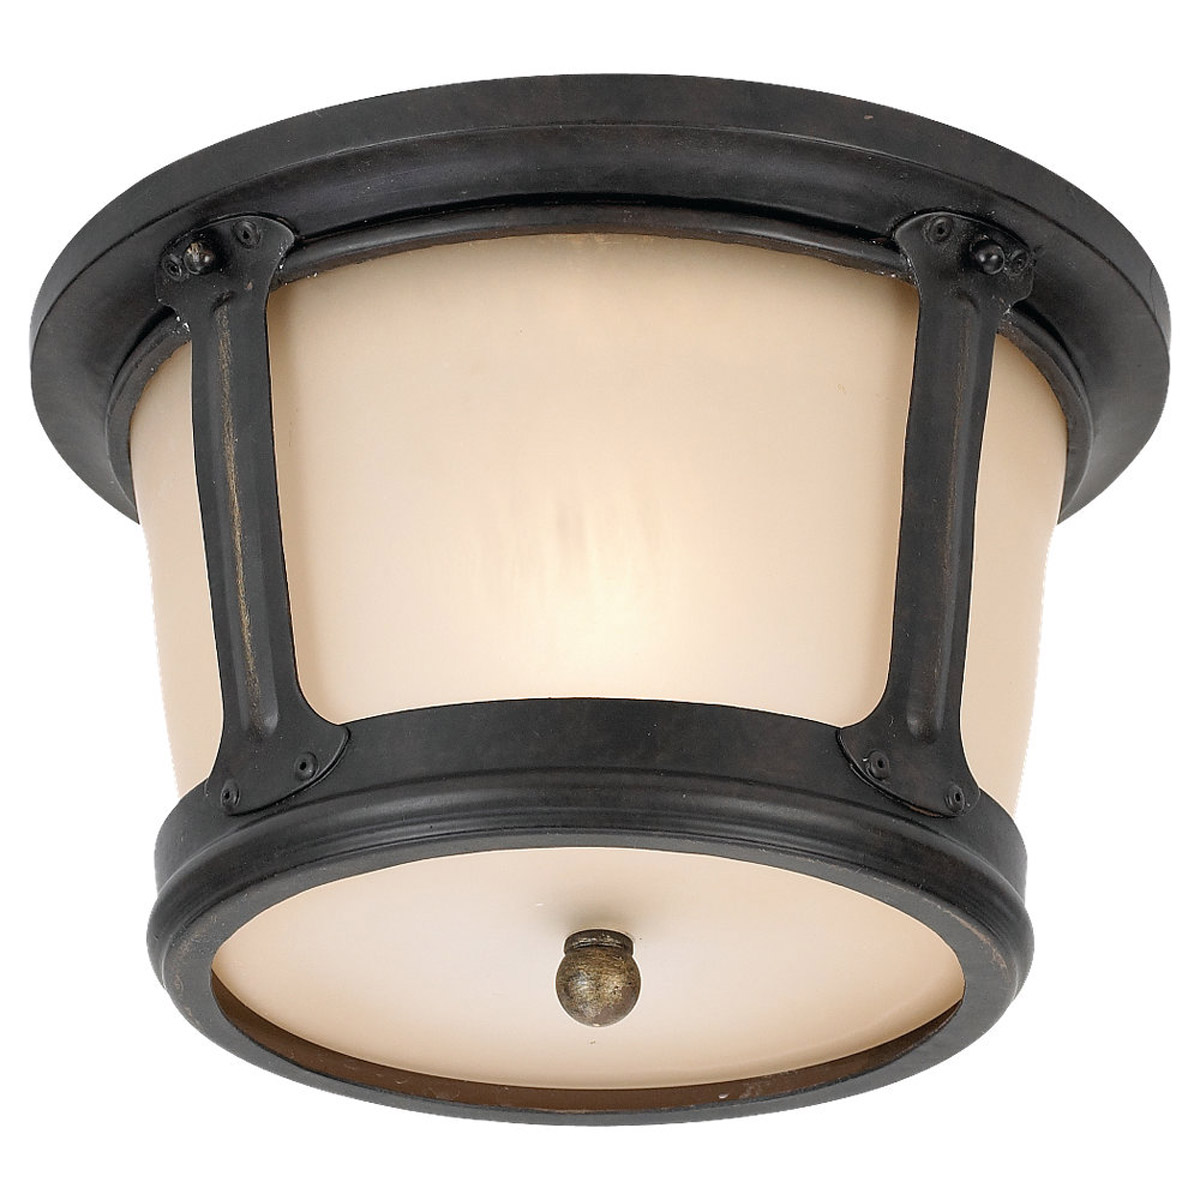 Sea Gull Lighting Cape May 1 Light Outdoor Fluorescent Ceiling in Burled Iron 79340BL-780